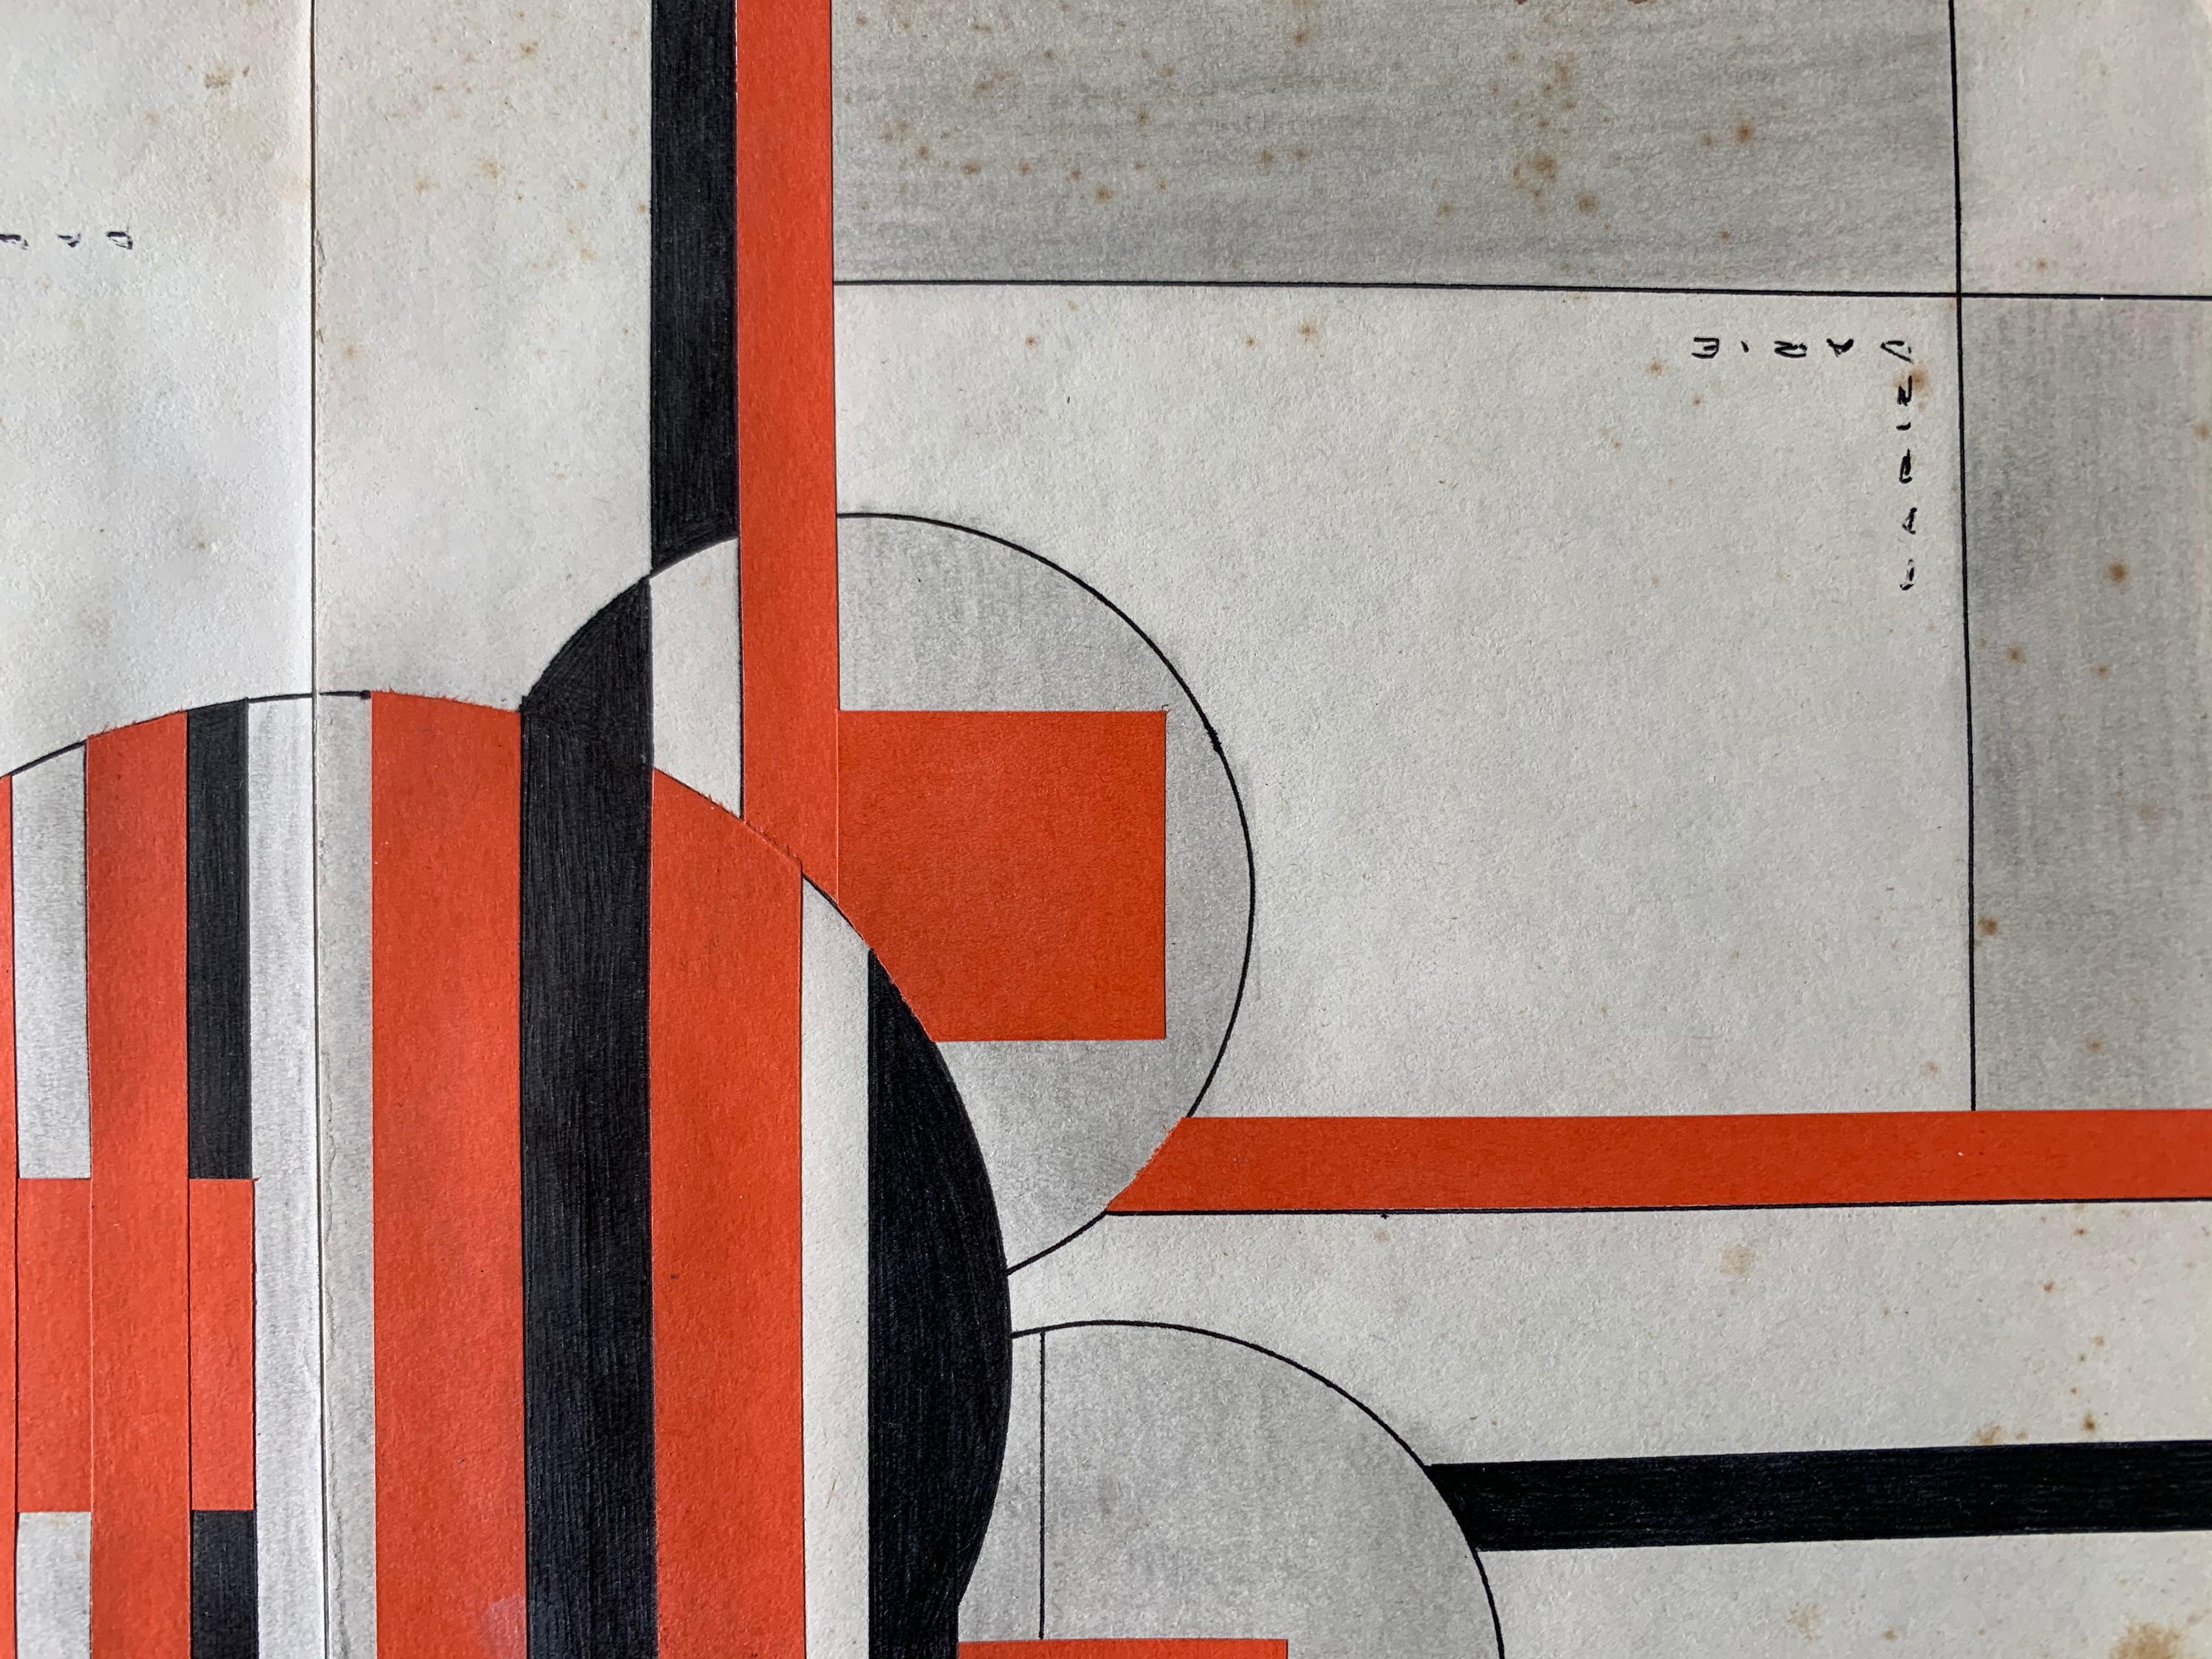 Untitled (Cuban Artist Geometric Collage Composition) 2